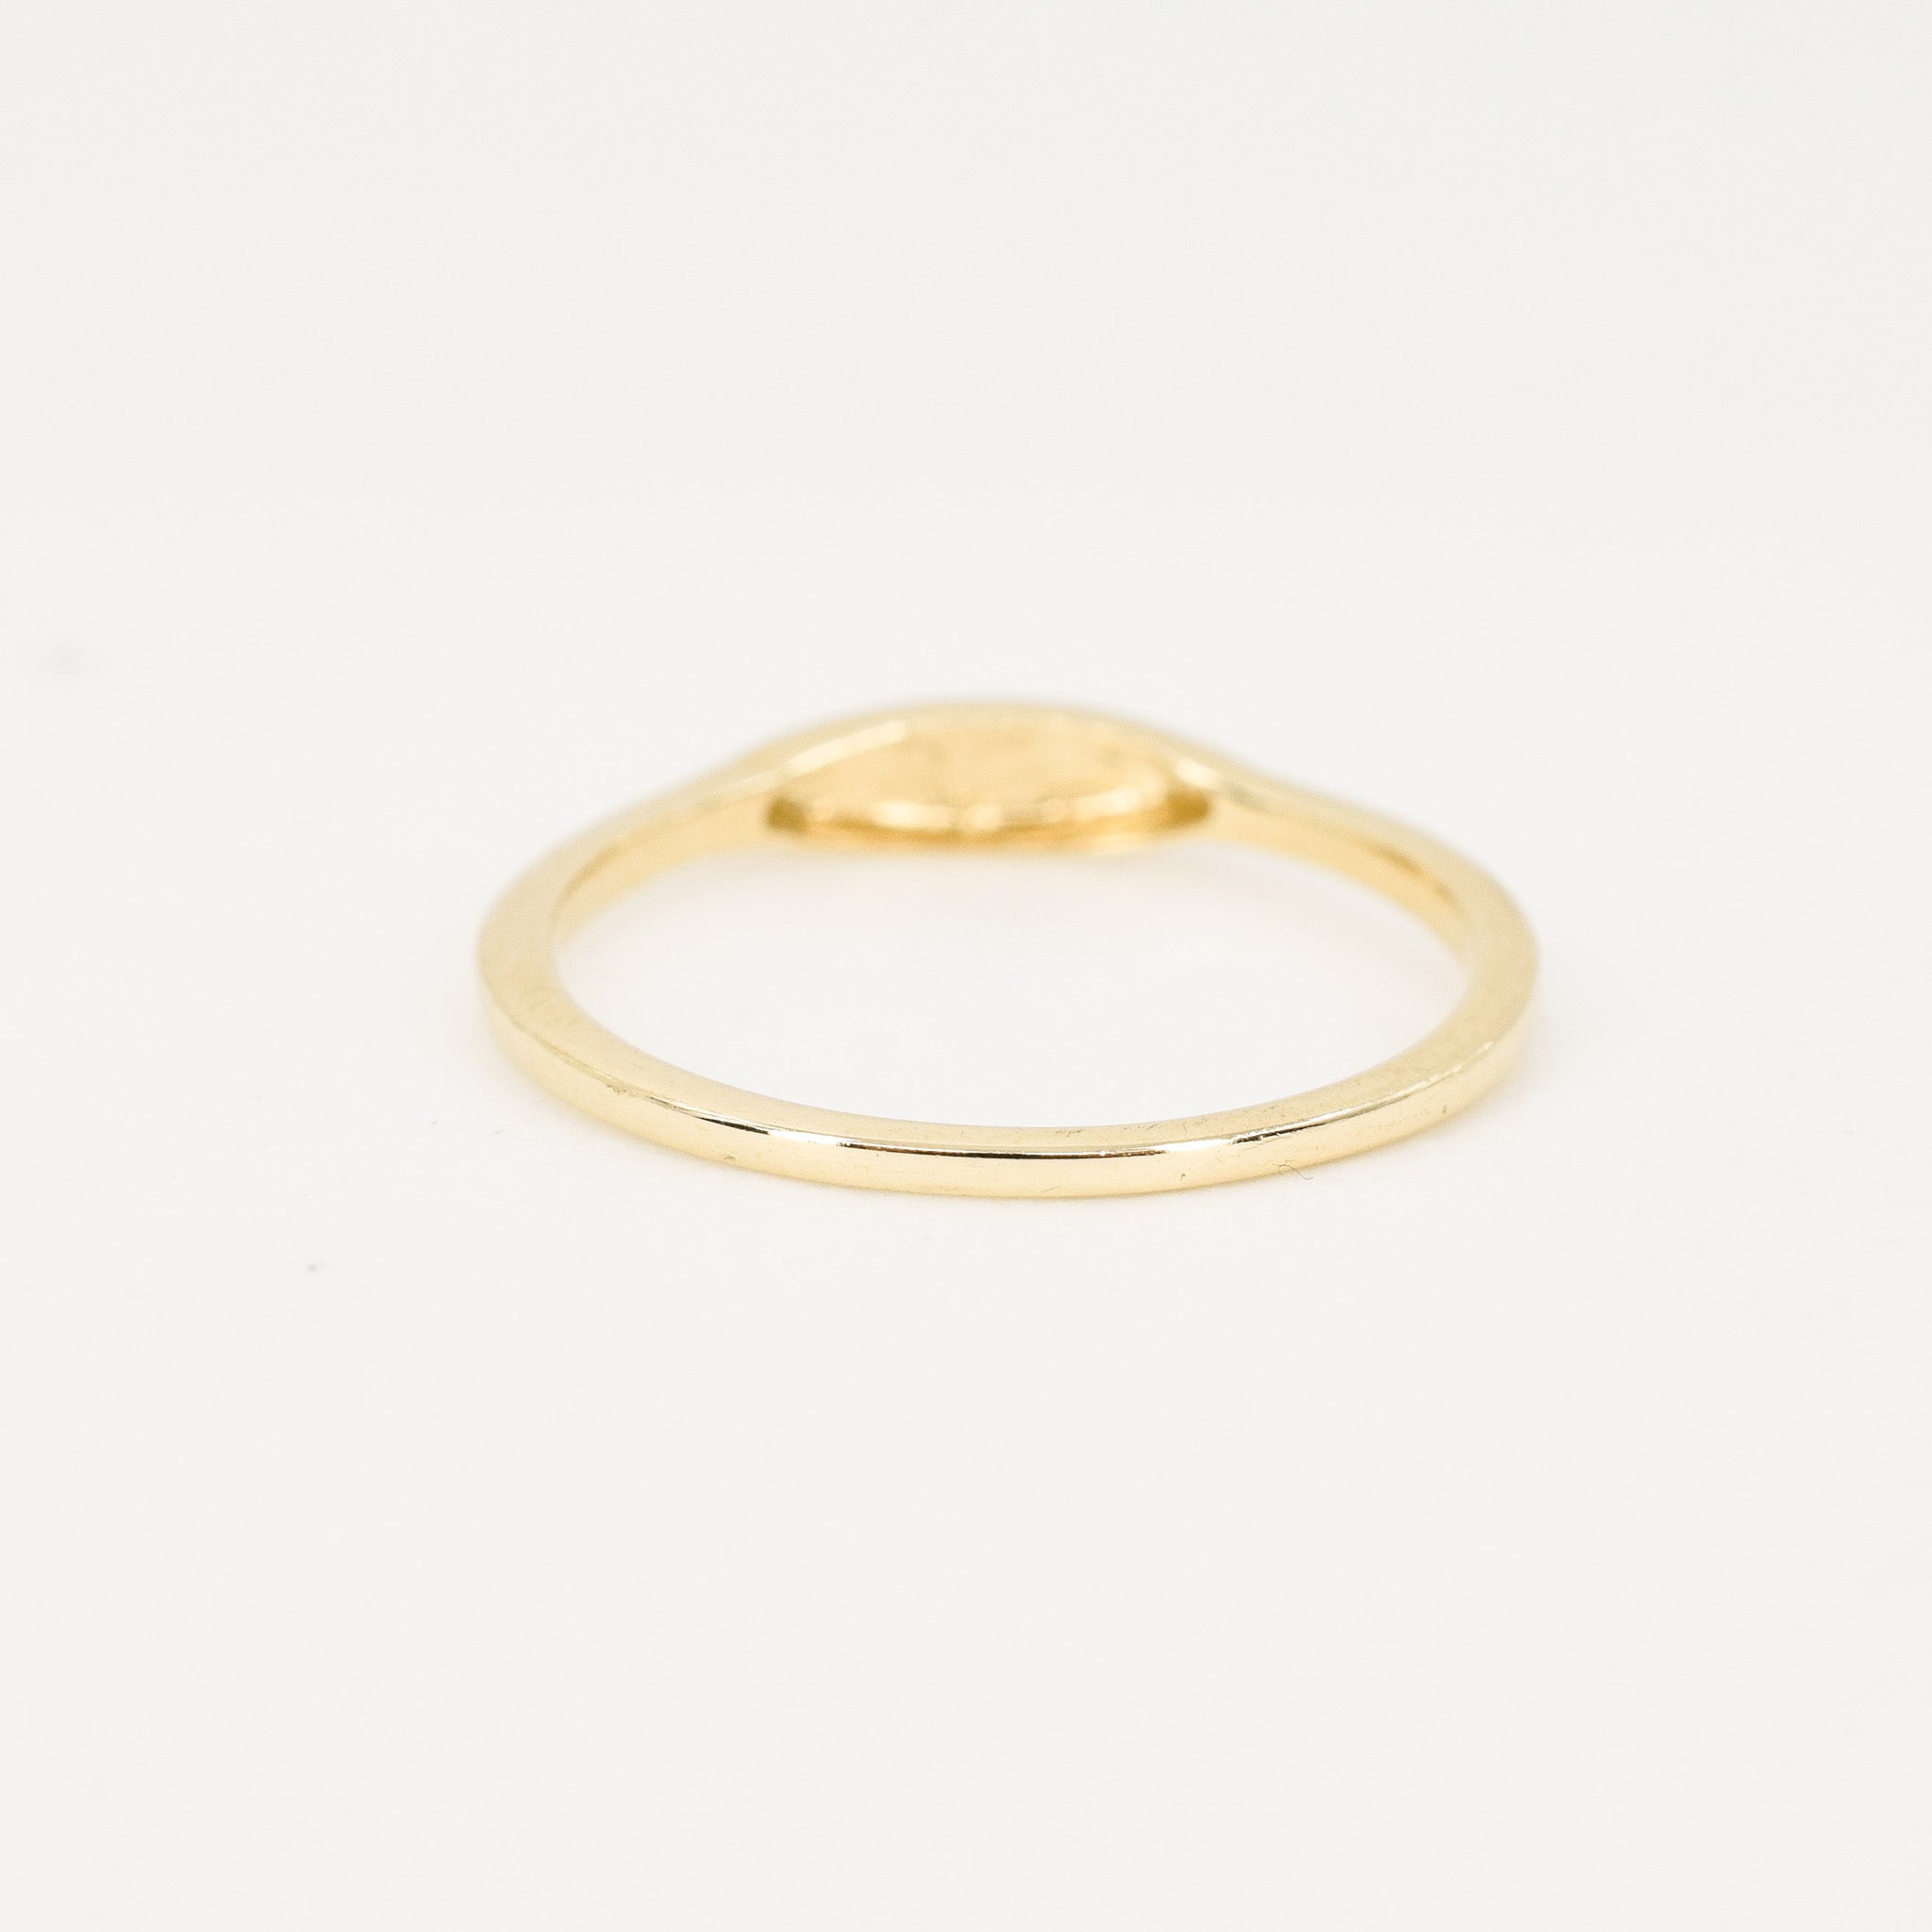 vintage gold ID ring, folklor vintage jewelry canada